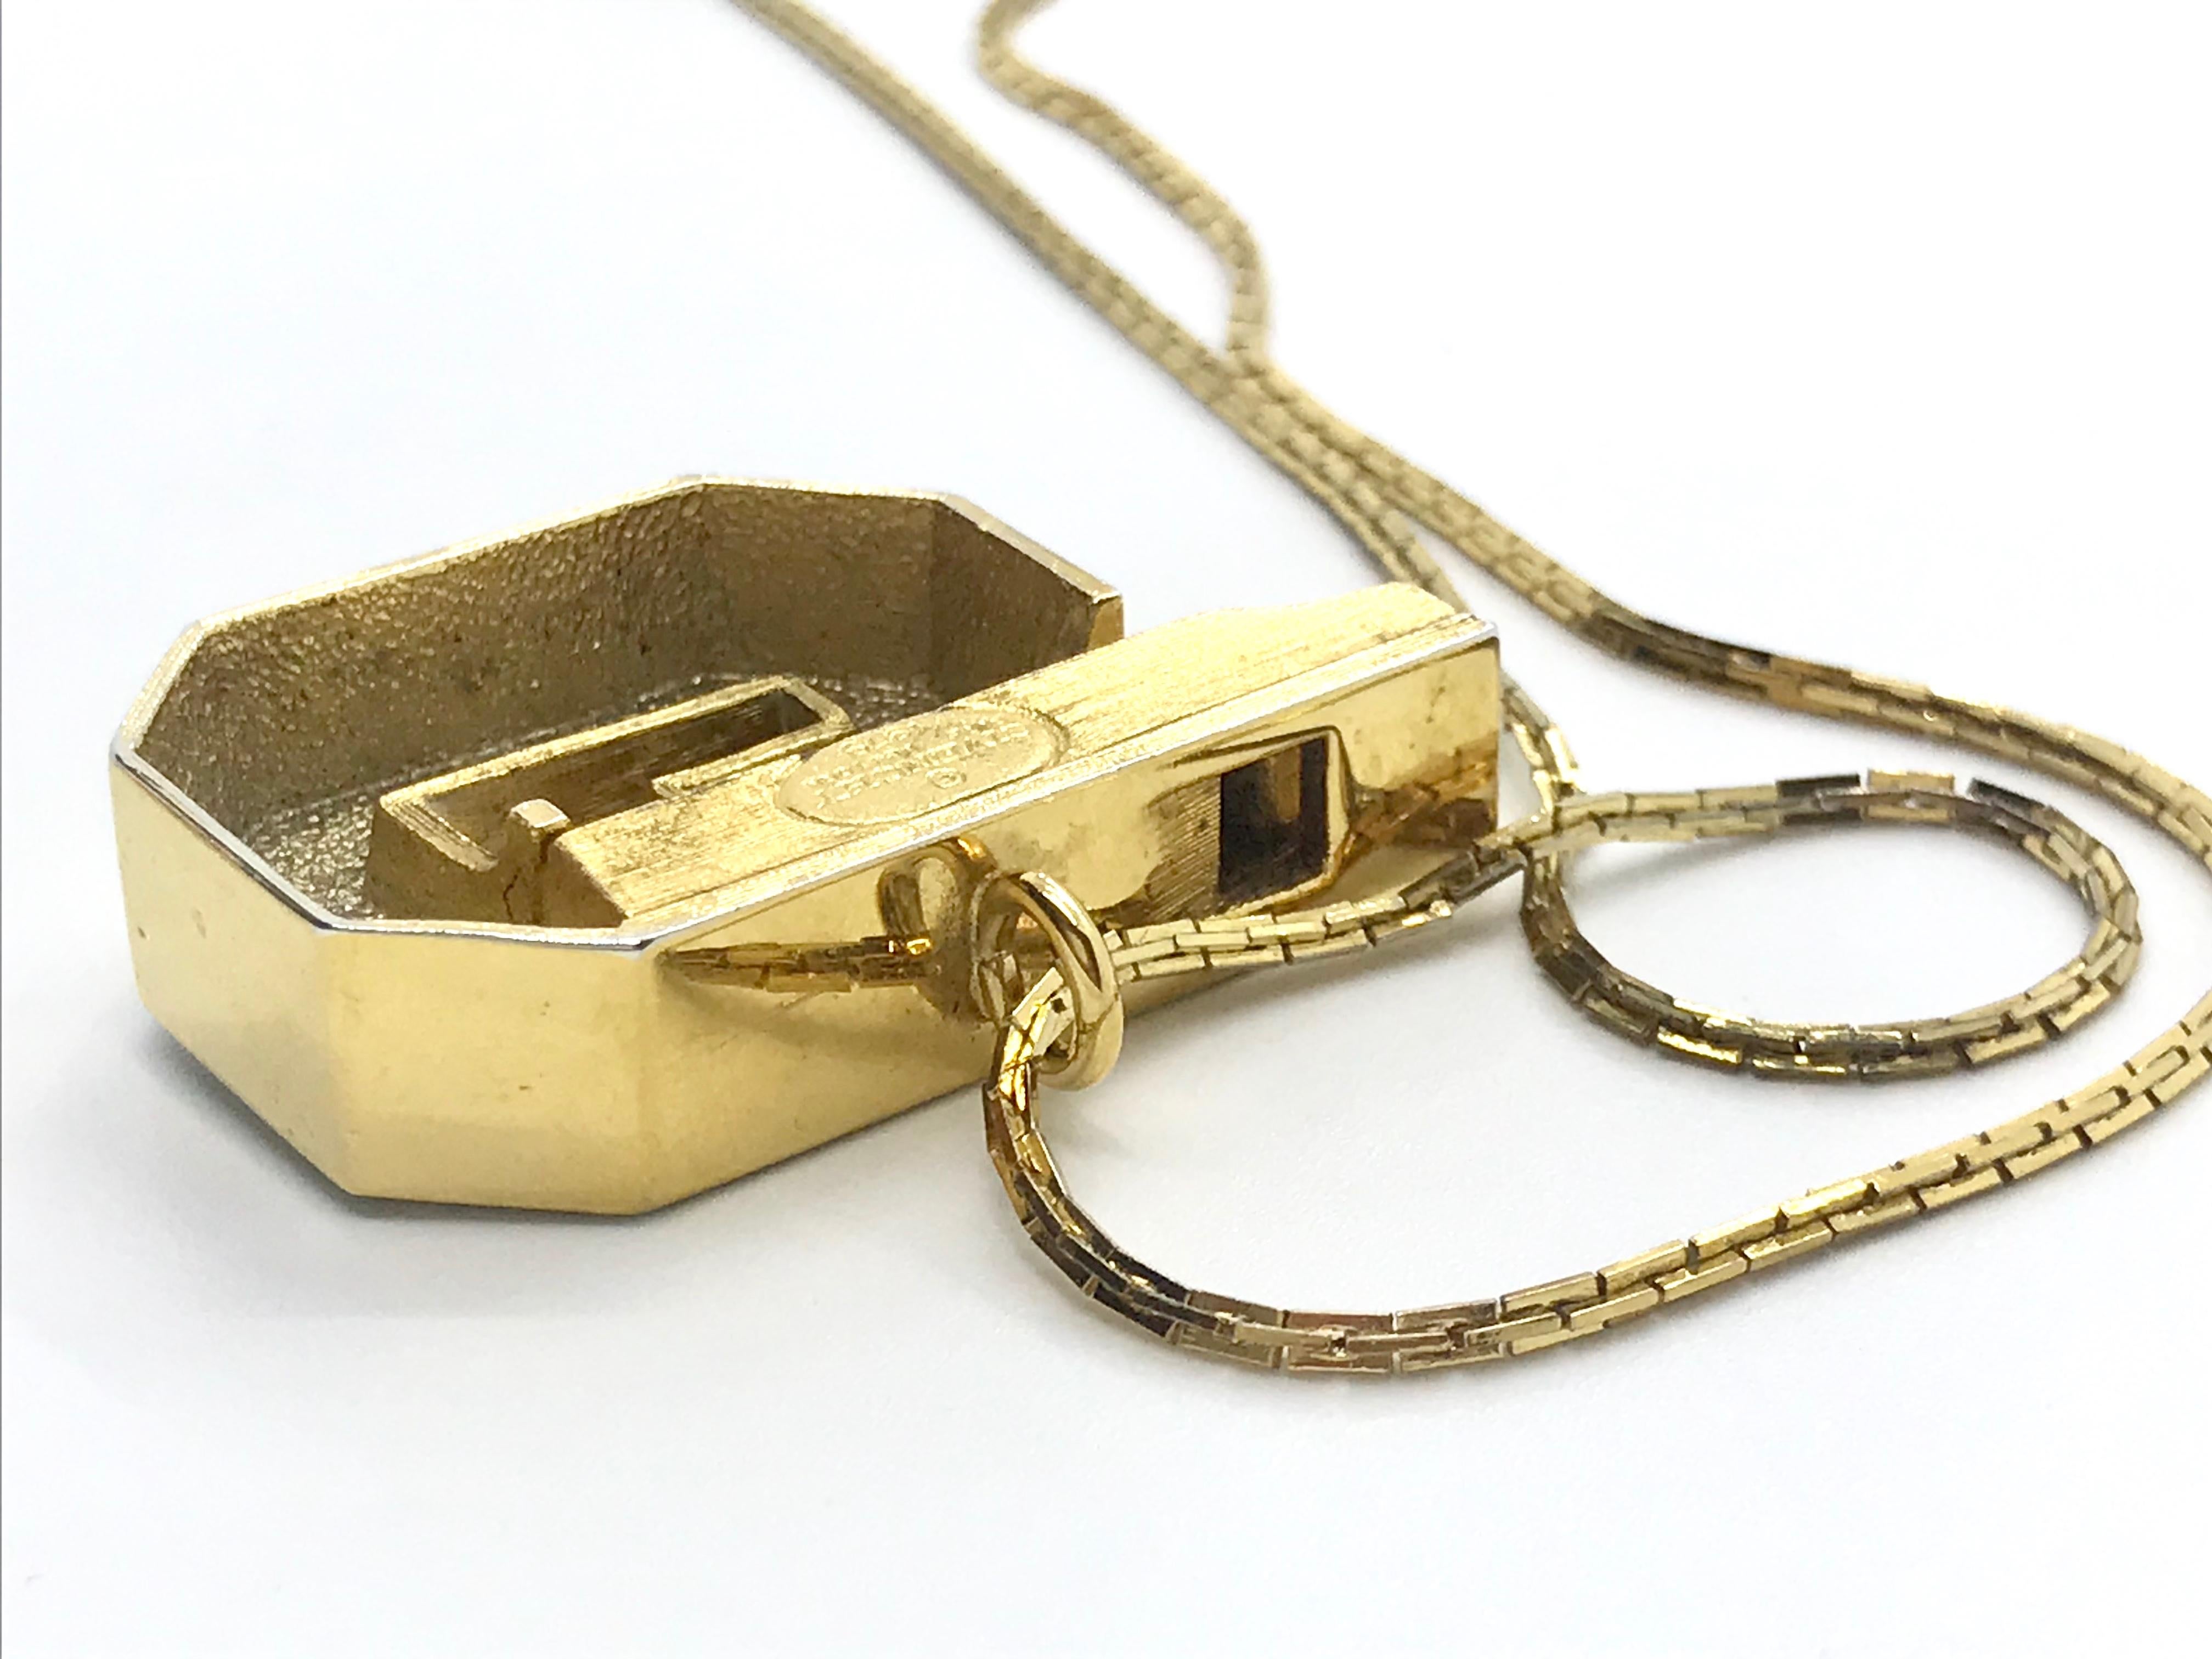 Givenchy 1970s Vintage Whistle Pendant Necklace In Excellent Condition For Sale In London, GB